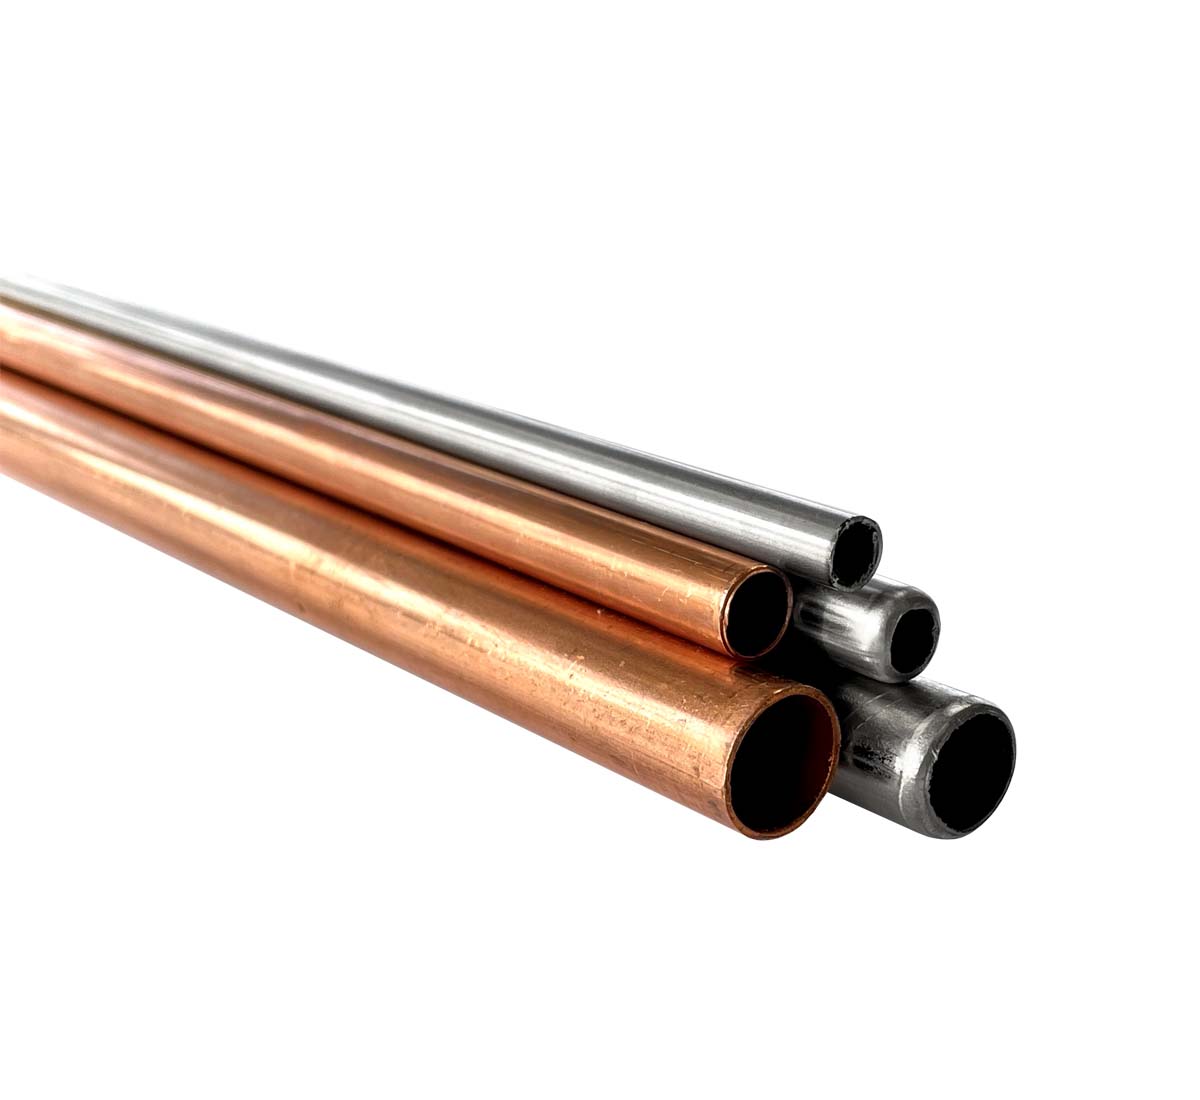 A close up picture of welded tubes in copper and stainless steel